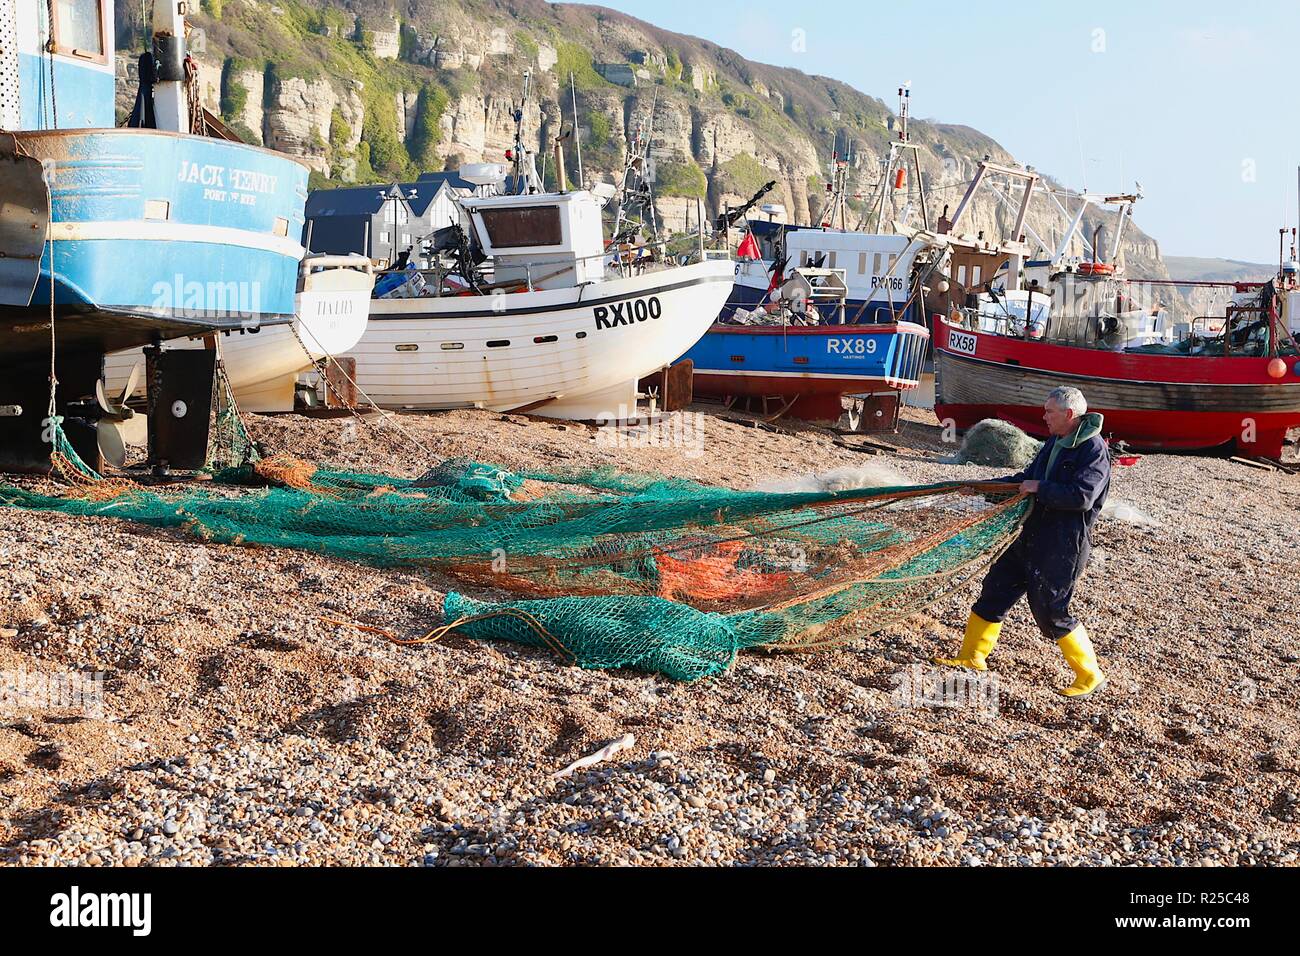 Fishings boats, The stade, historical fishing beach. A fisherman gathers his fishing nets in front of the fishing boats on the only beach launched fishing fleet in the uk after a morning out at sea. Hastings, East Sussex, uk Stock Photo